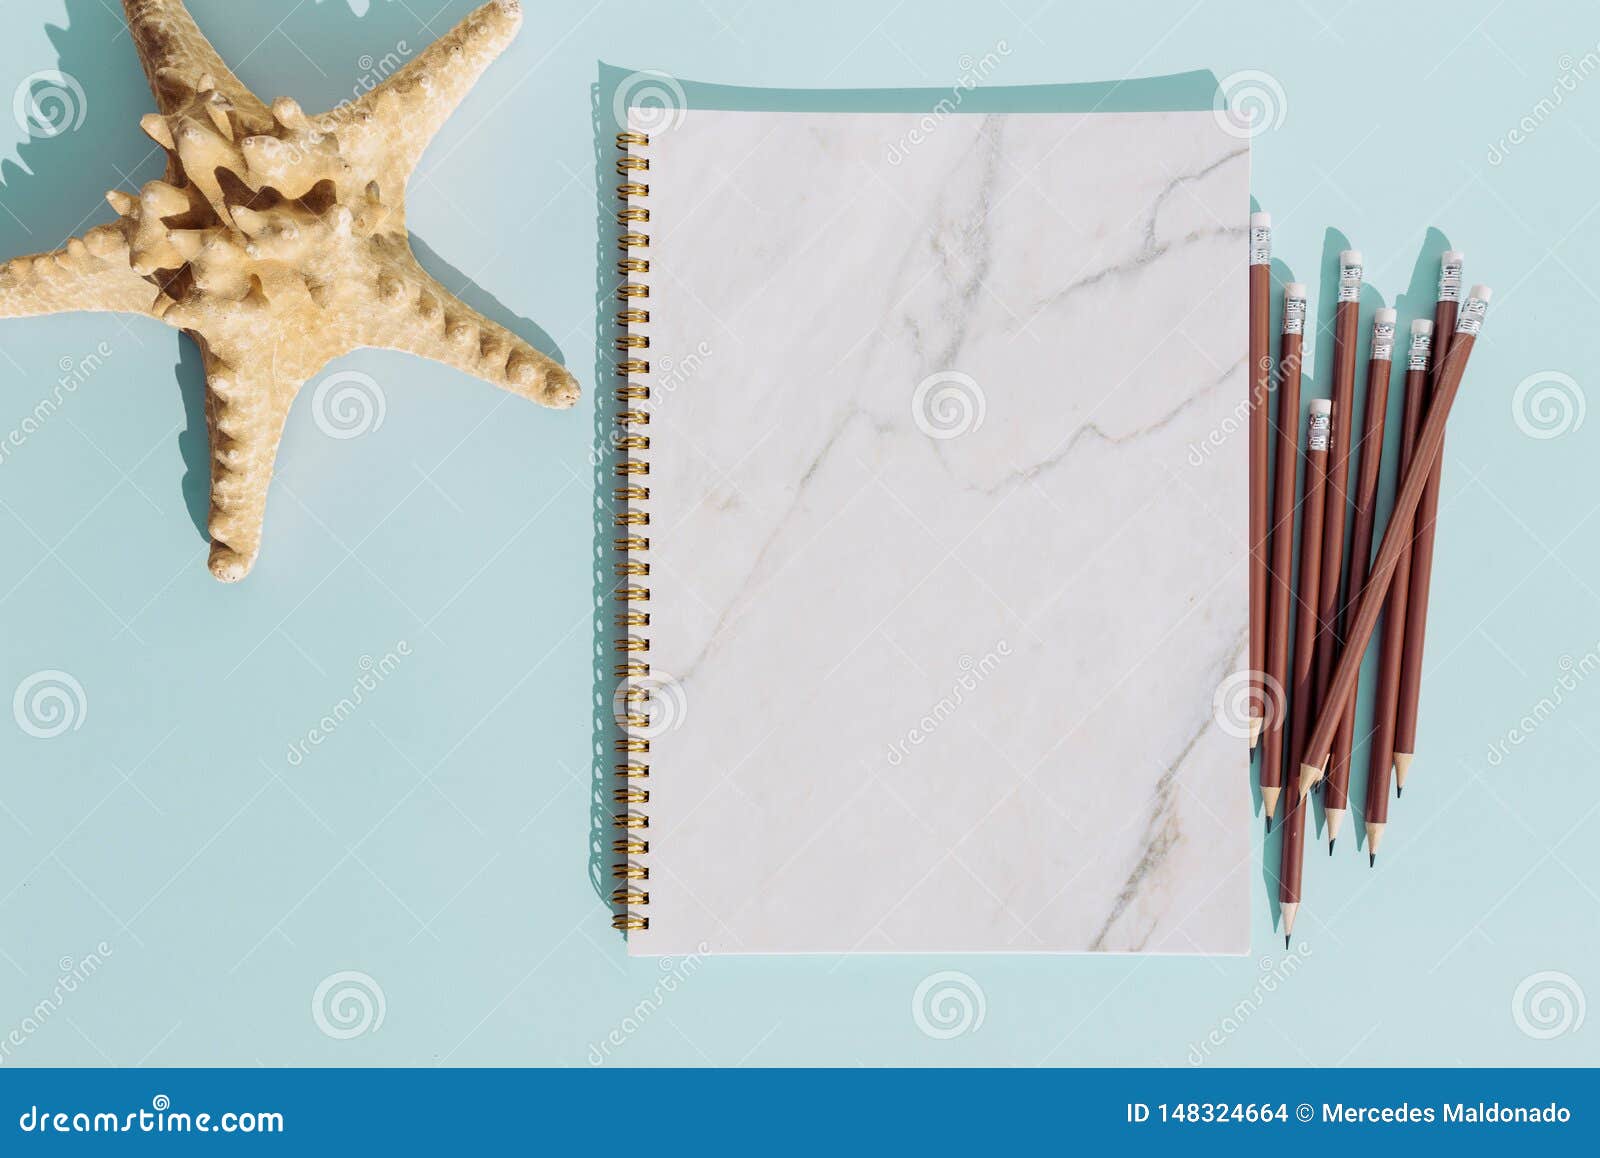 https://thumbs.dreamstime.com/z/flat-lay-notebook-pencil-starfish-summer-holiday-turquoise-background-top-view-above-148324664.jpg